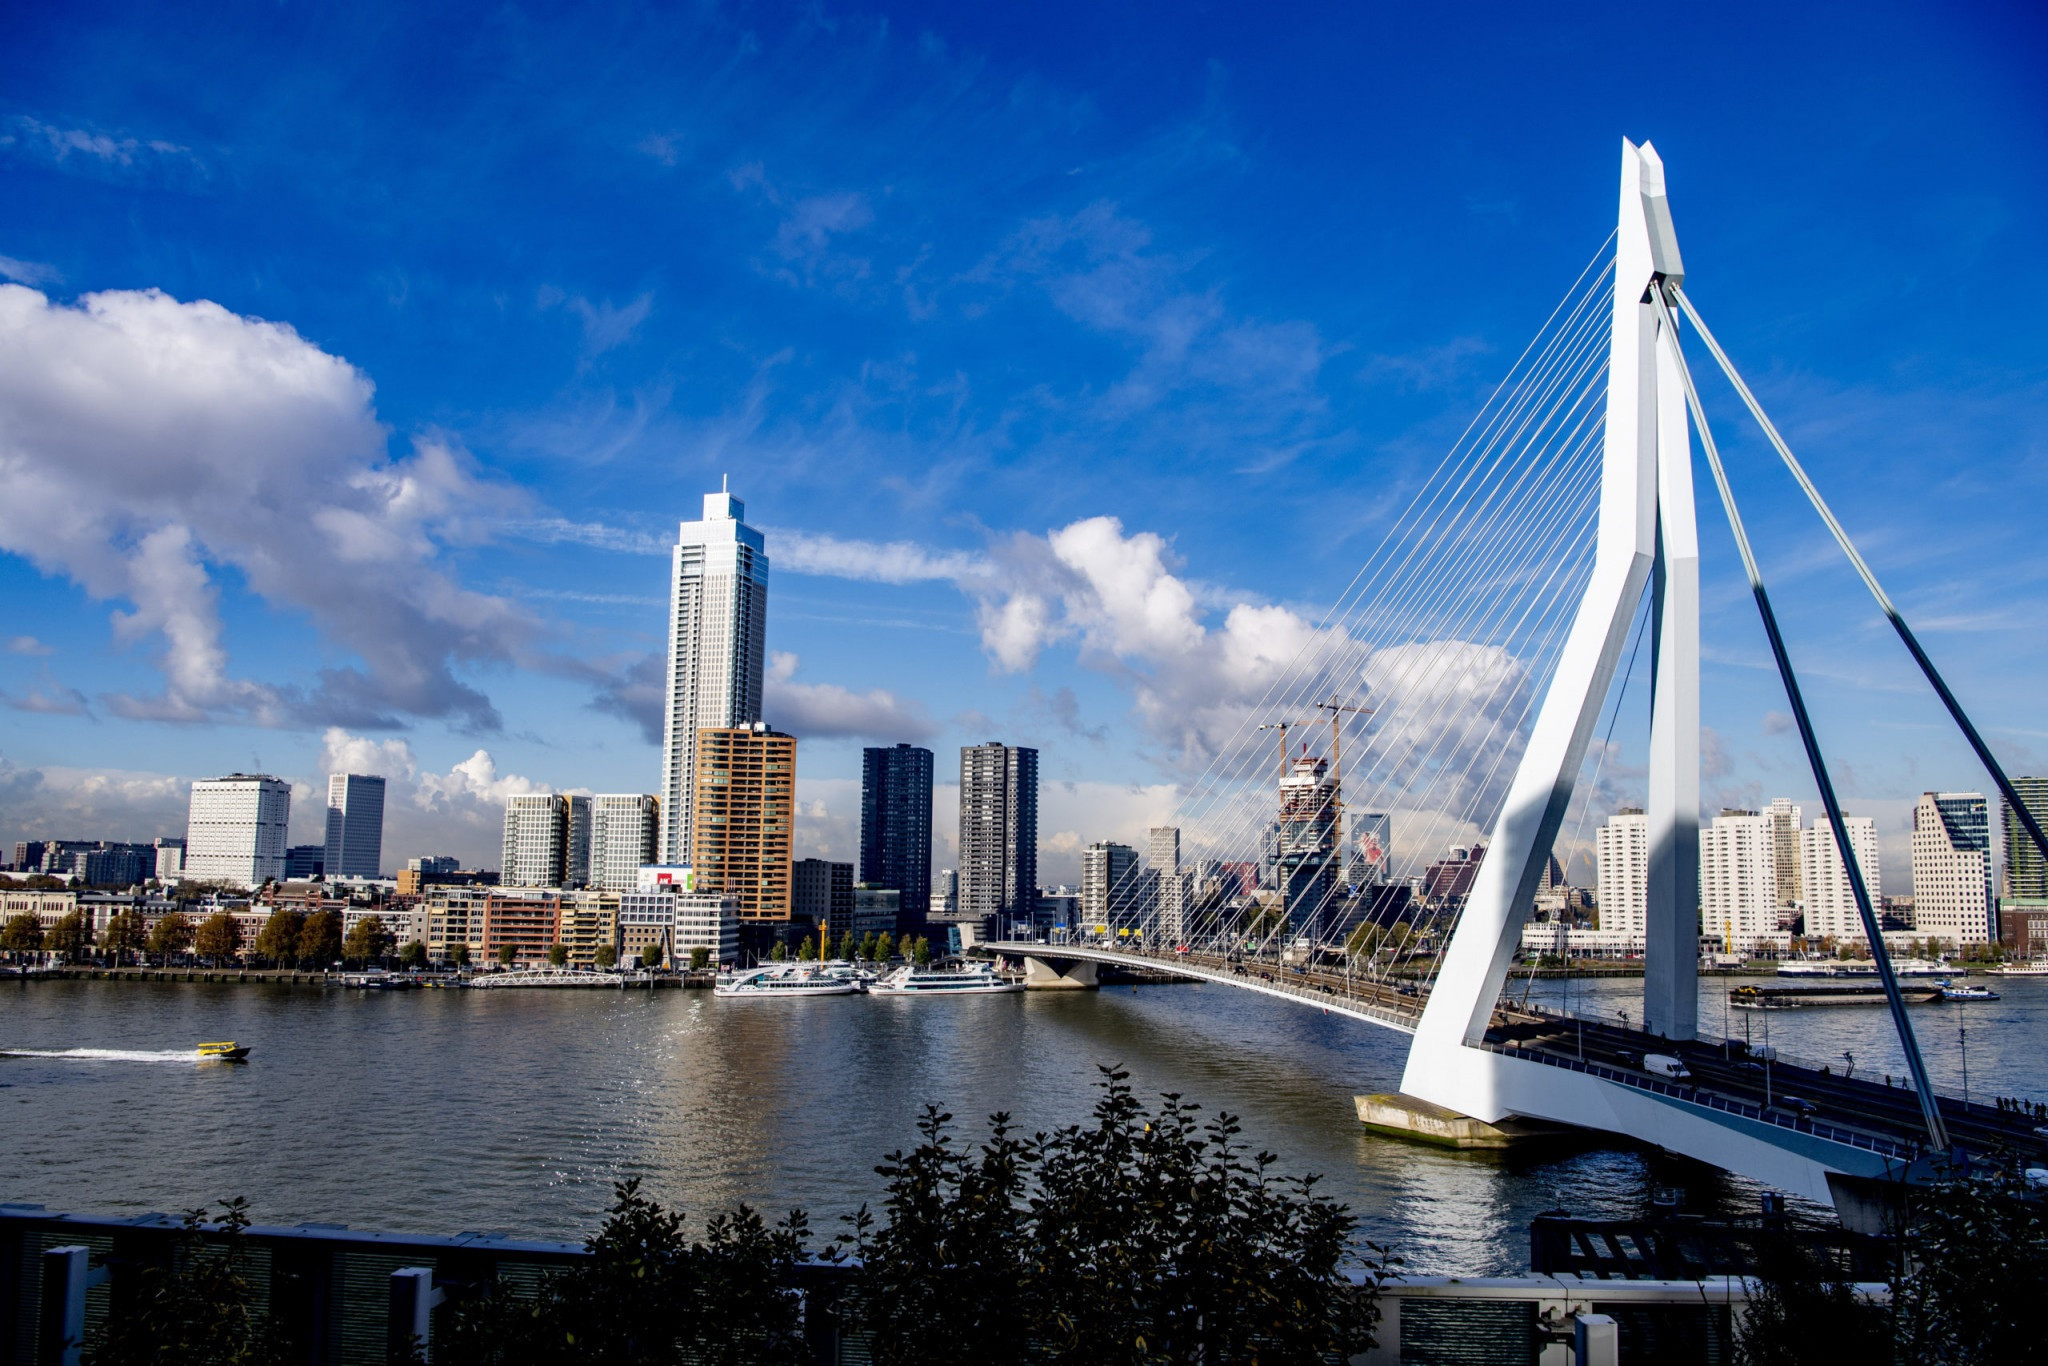 Rotterdam is due to stage the first-ever European Para Championships in August ©European Para Championships